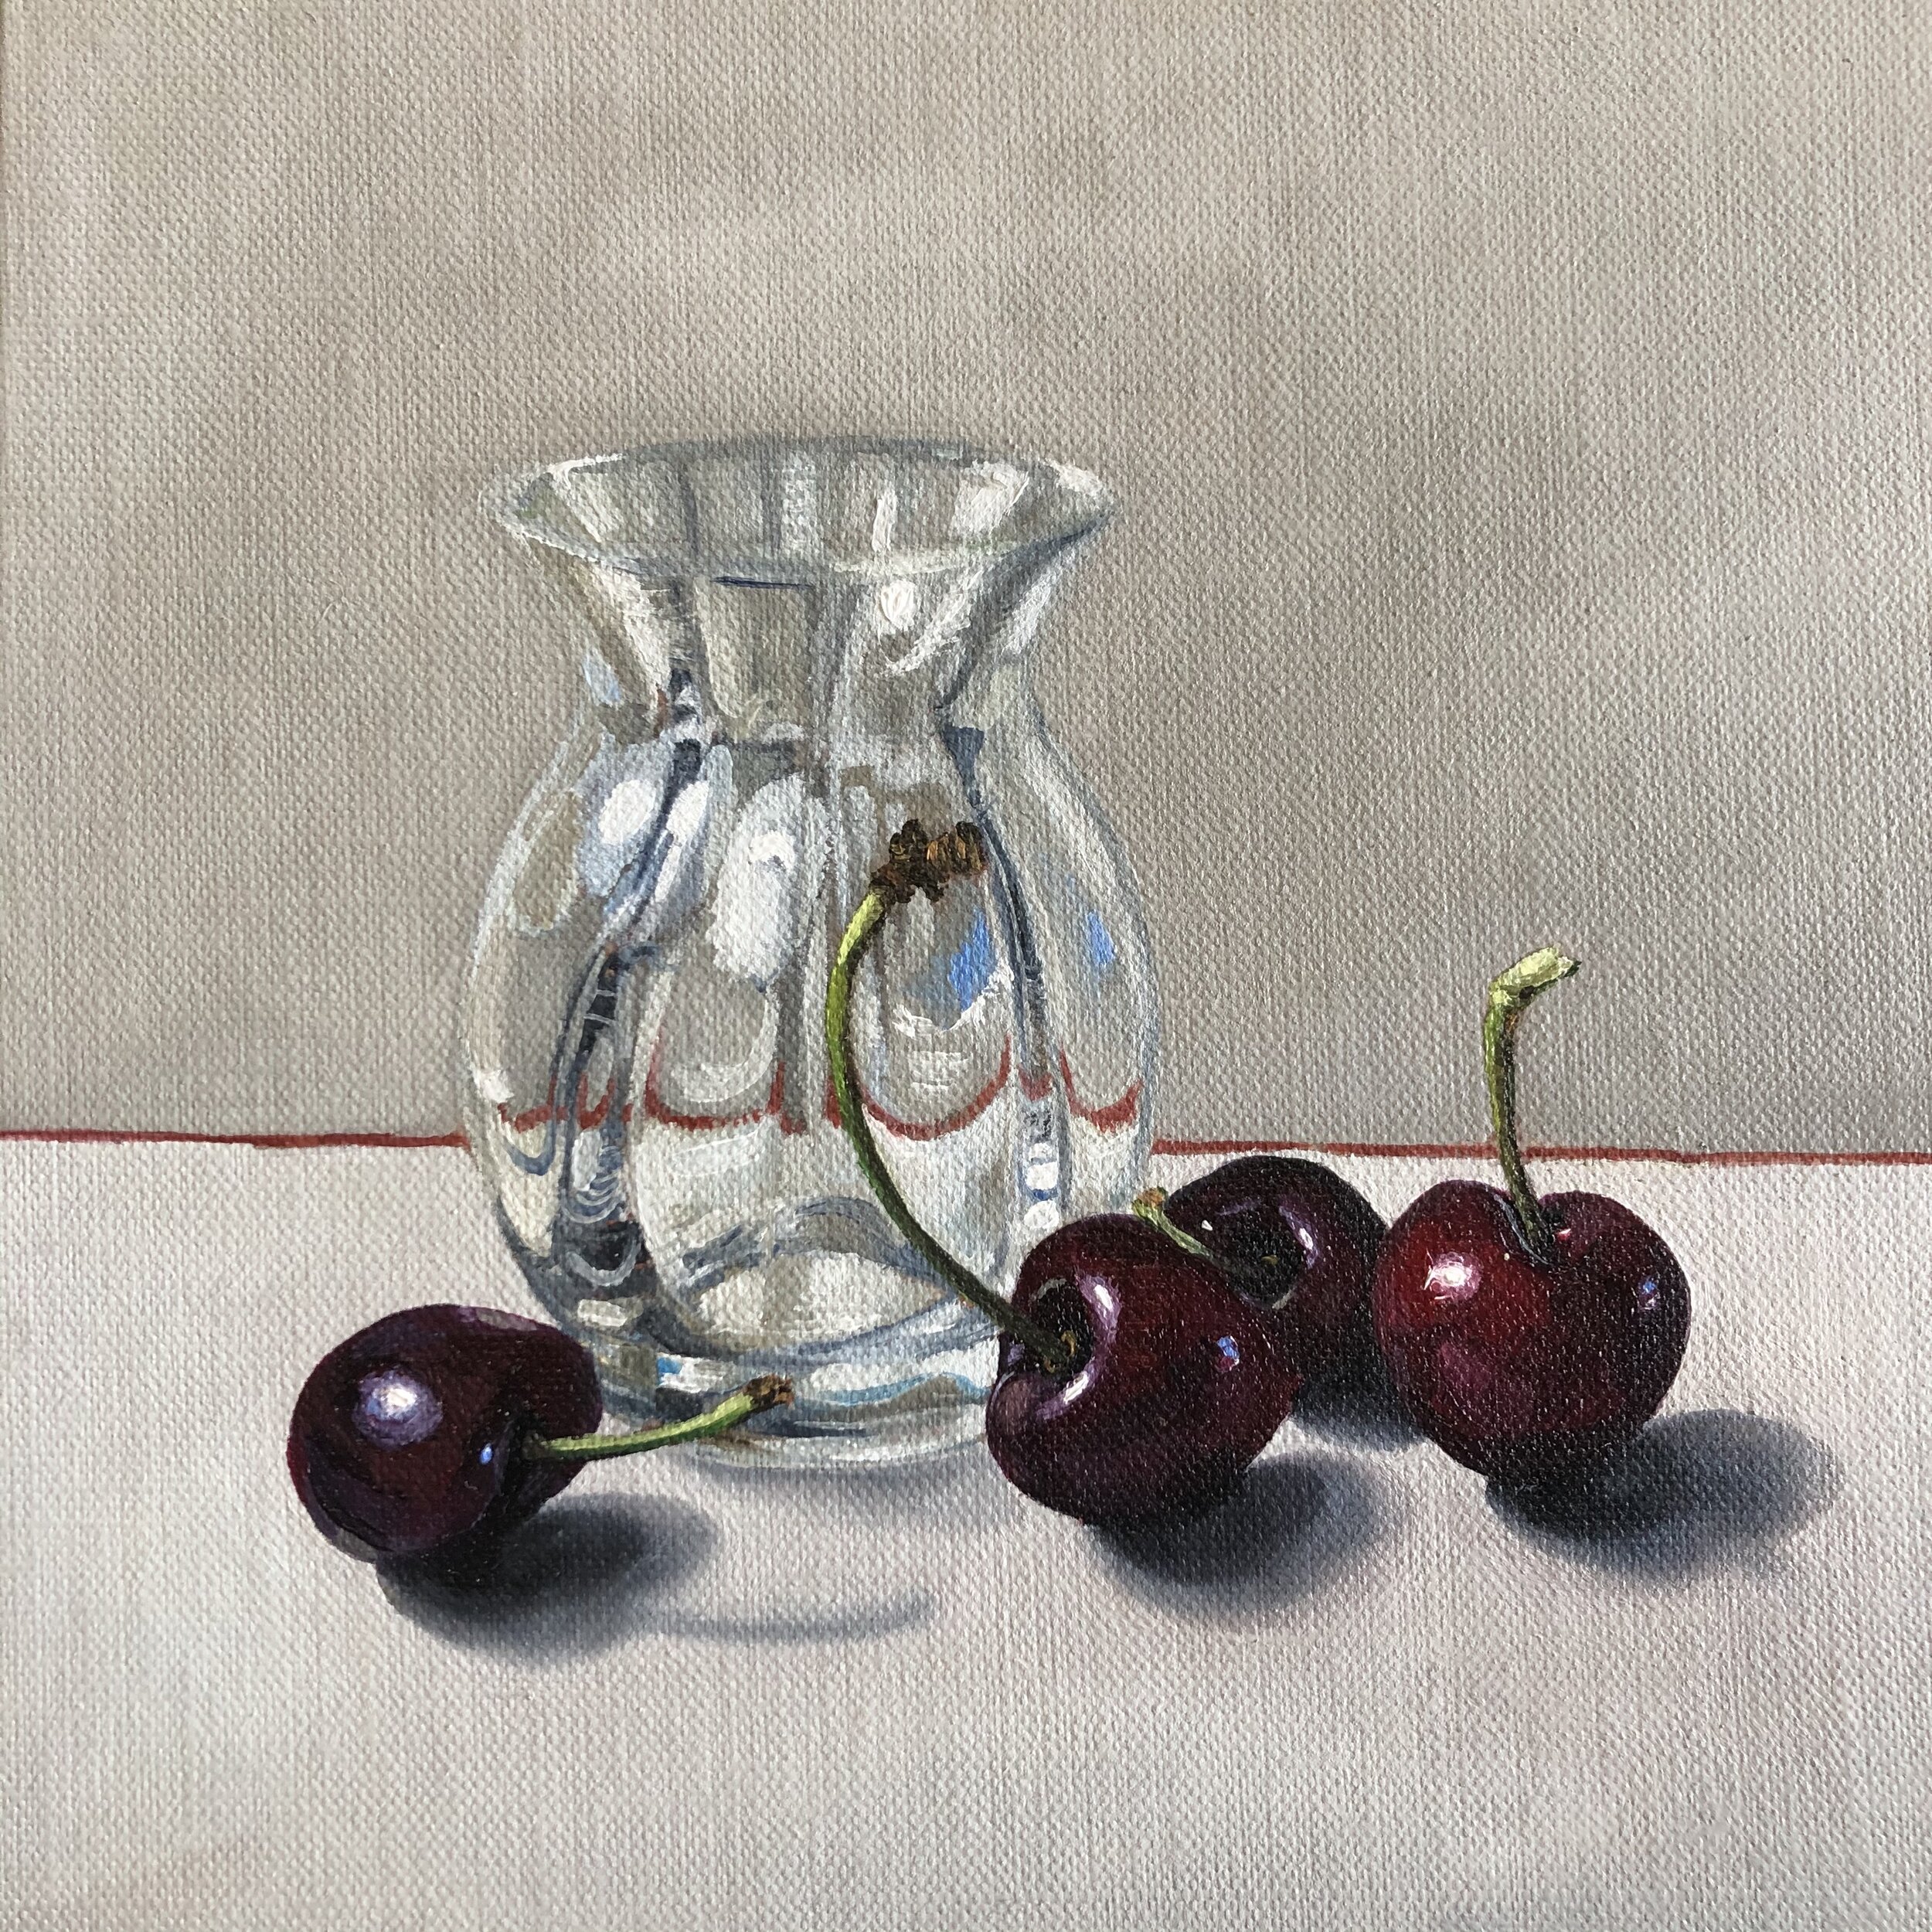 Cherries with little crystal vase